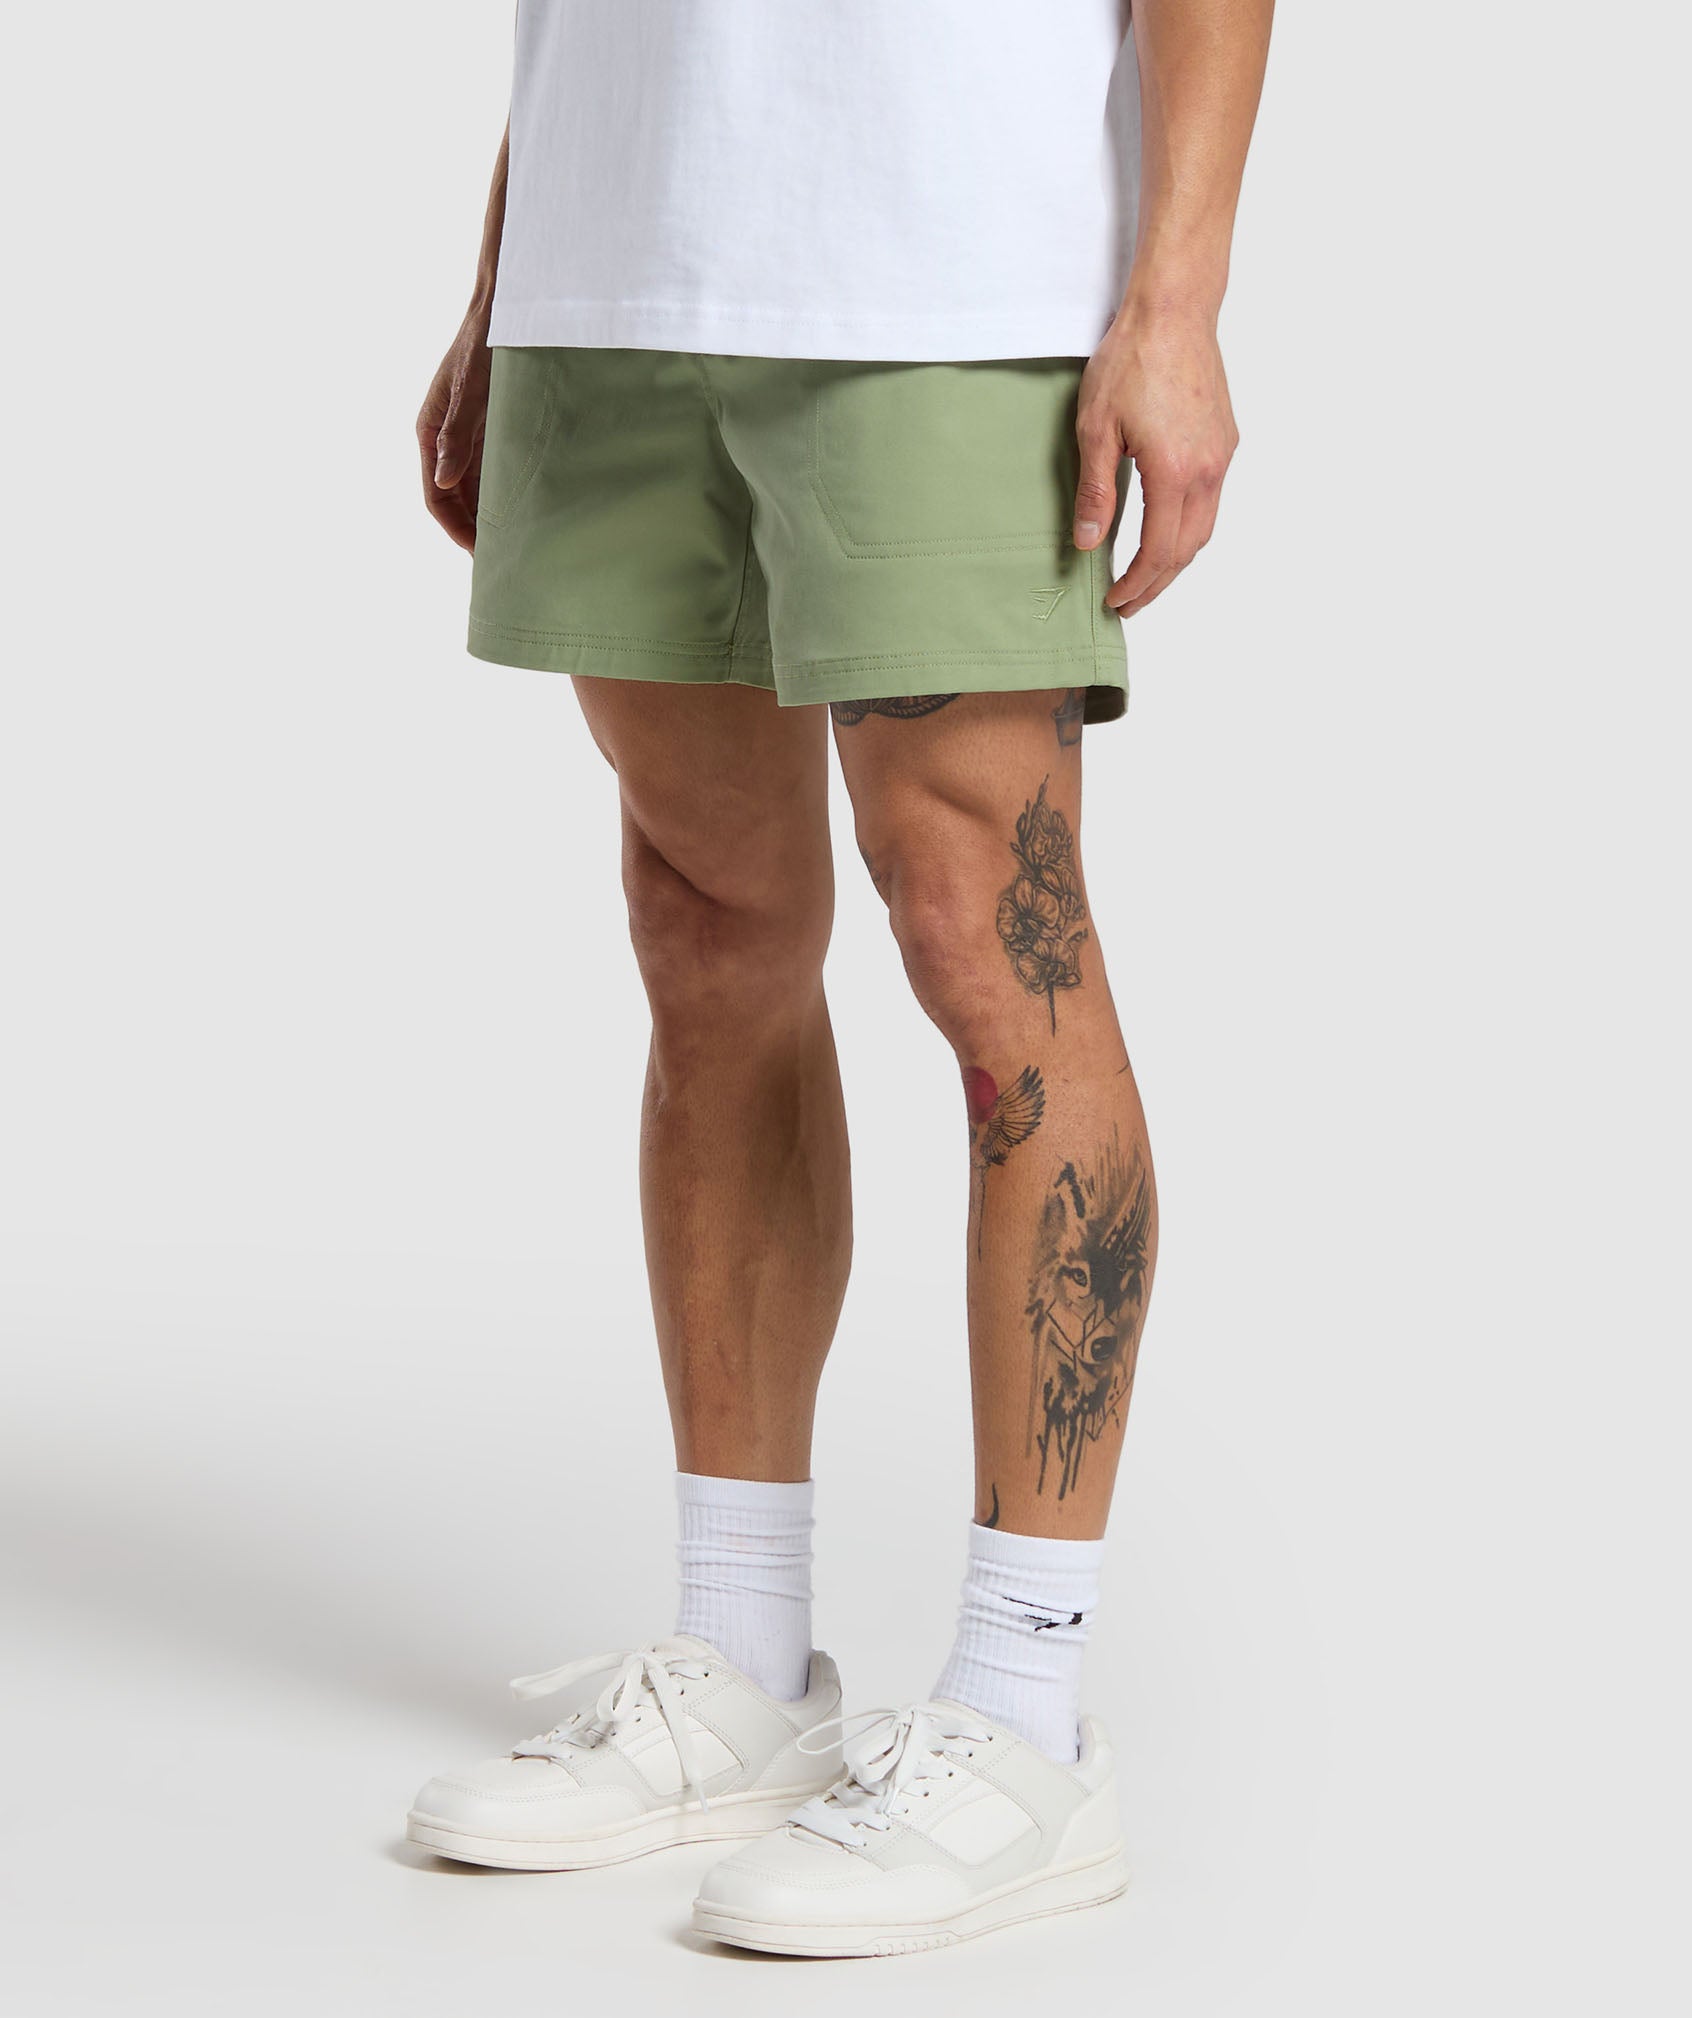 Rest Day Woven Shorts in Natural Sage Green - view 3